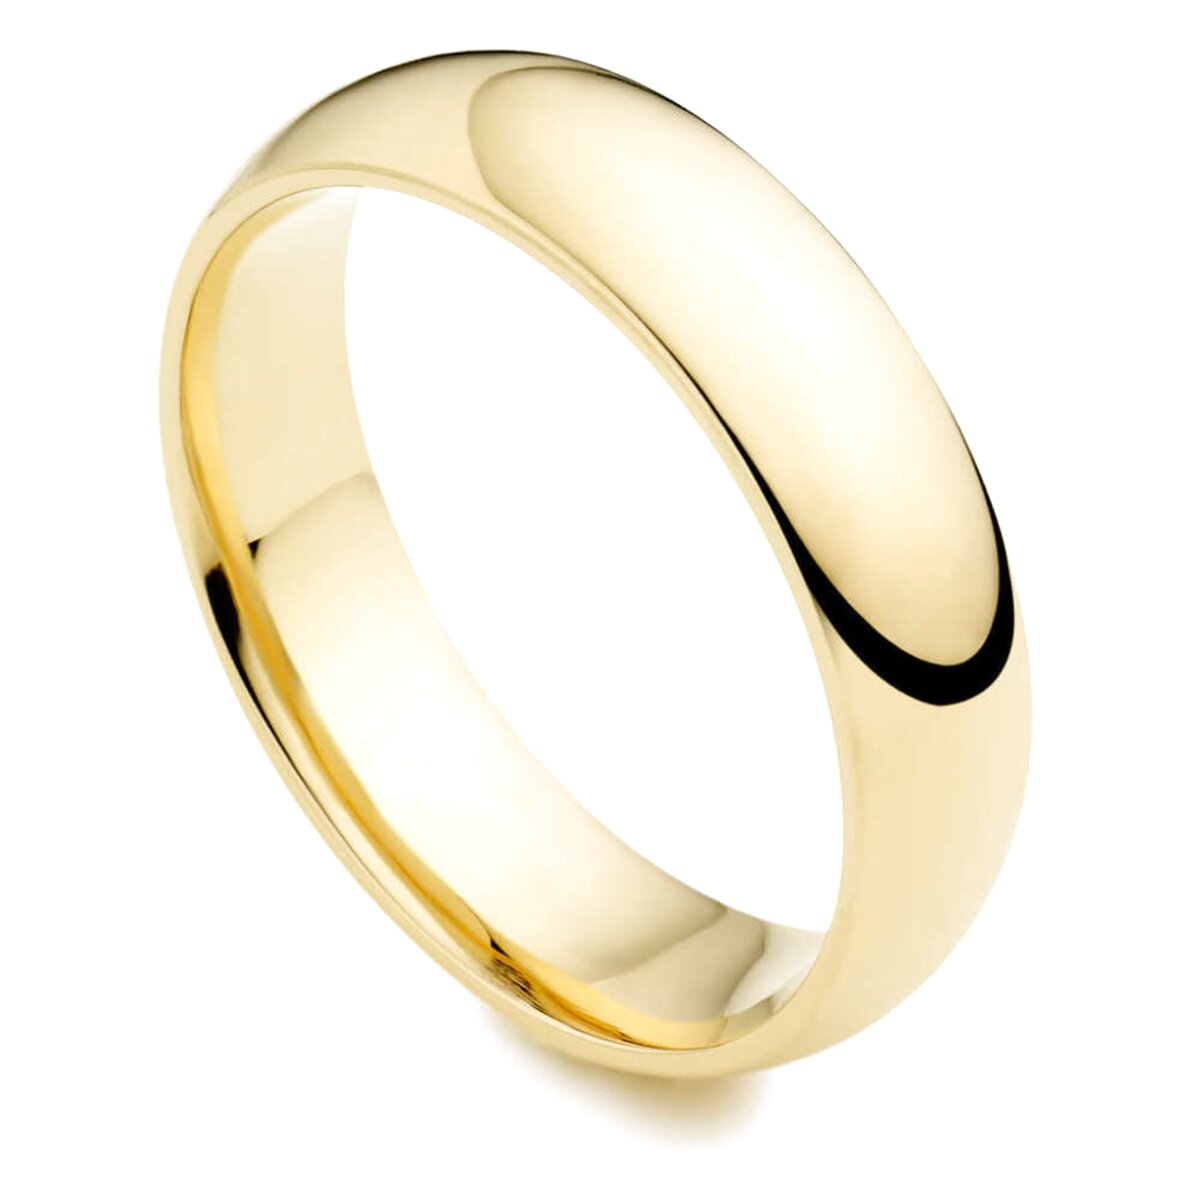 Mens 9Ct Gold Wedding Rings for sale in UK | View 68 ads